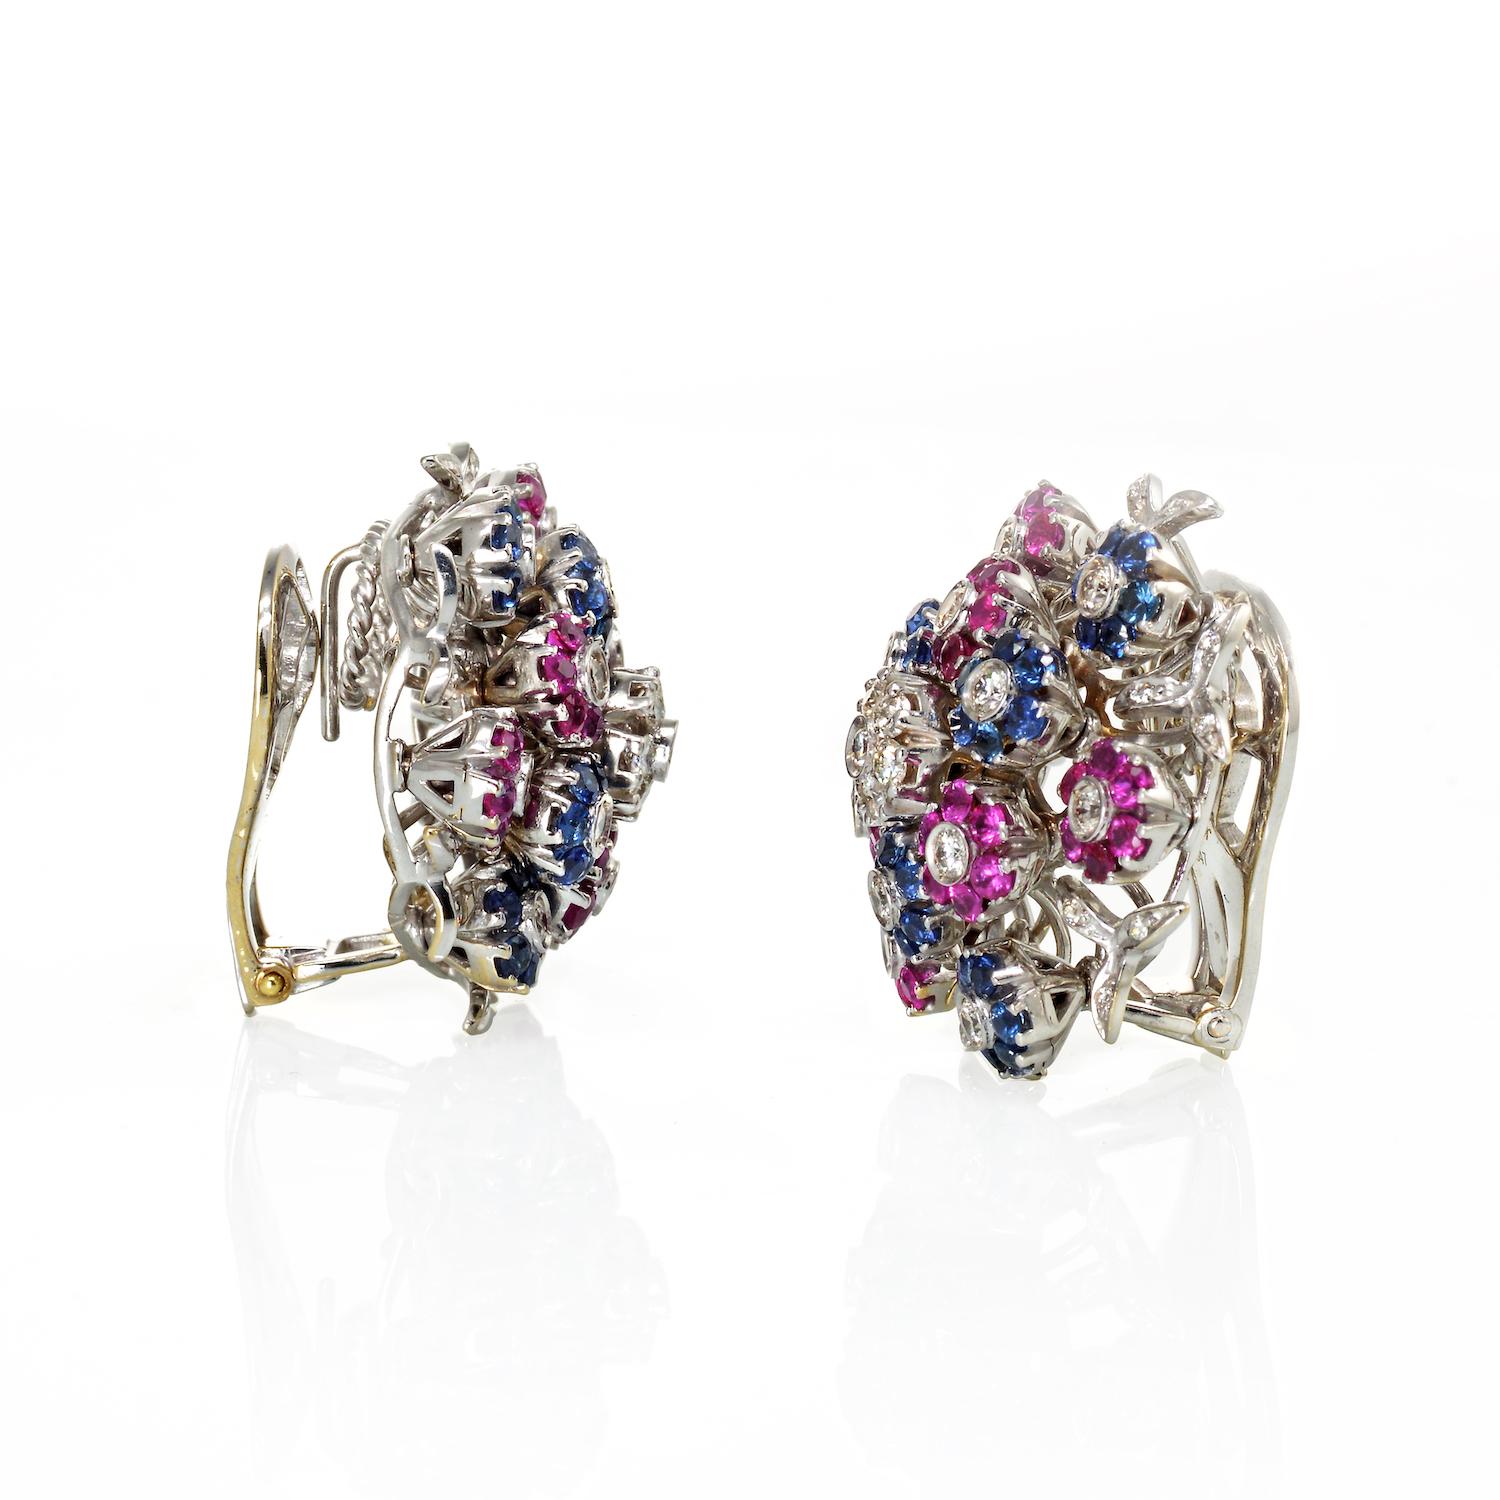 Step into the world of vintage elegance with these stunning Cartier Tremblant 18K White Gold Diamond, Sapphire, and Ruby Clip-On Earrings, a true testament to timeless design and craftsmanship. This pair of retro Cartier earrings showcases a